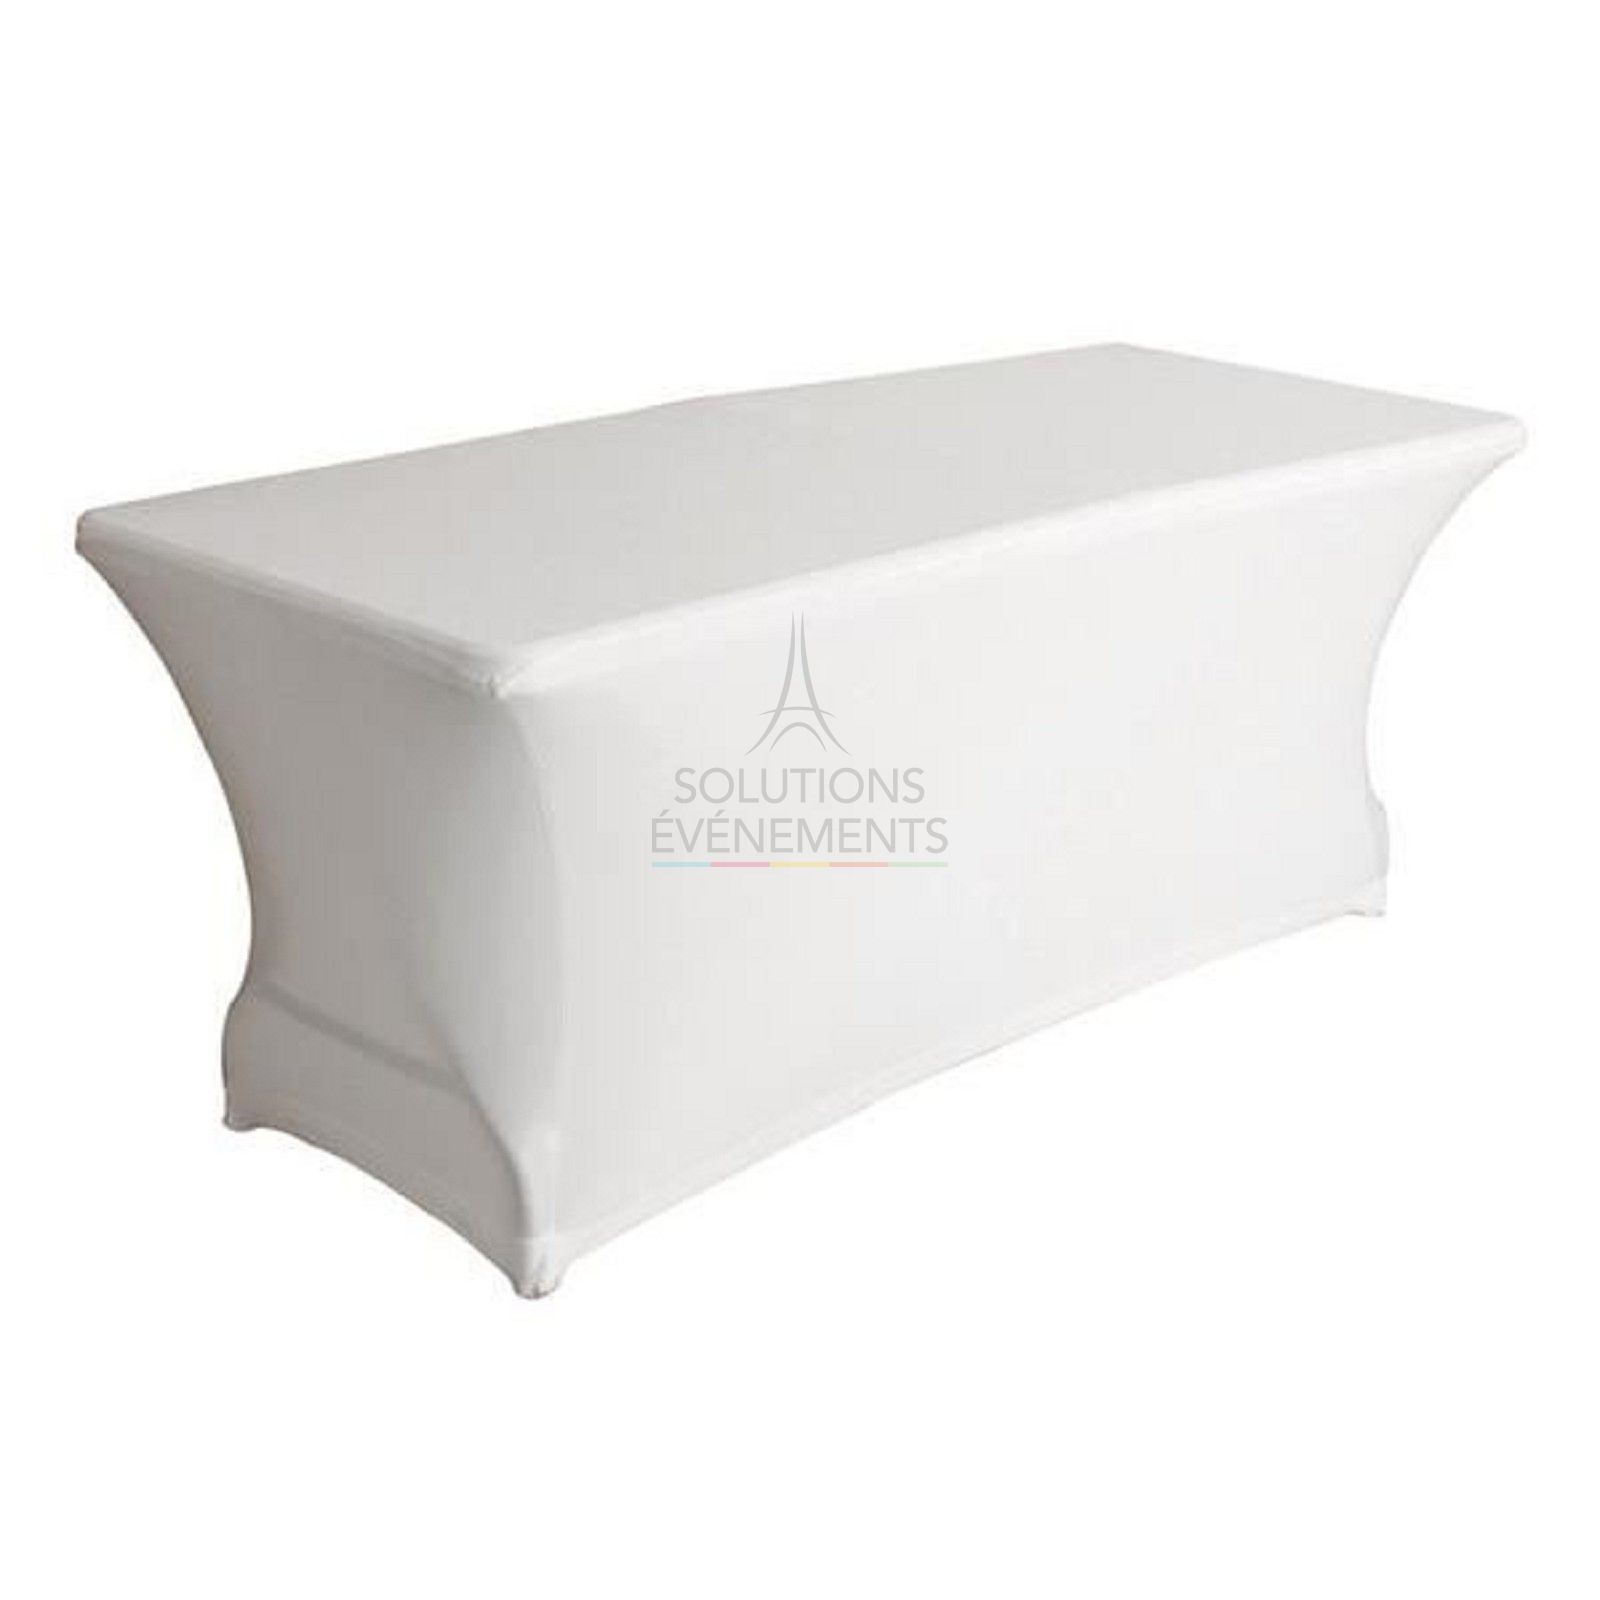 Rental of rectangle table with white cover (for approximately 4 people)